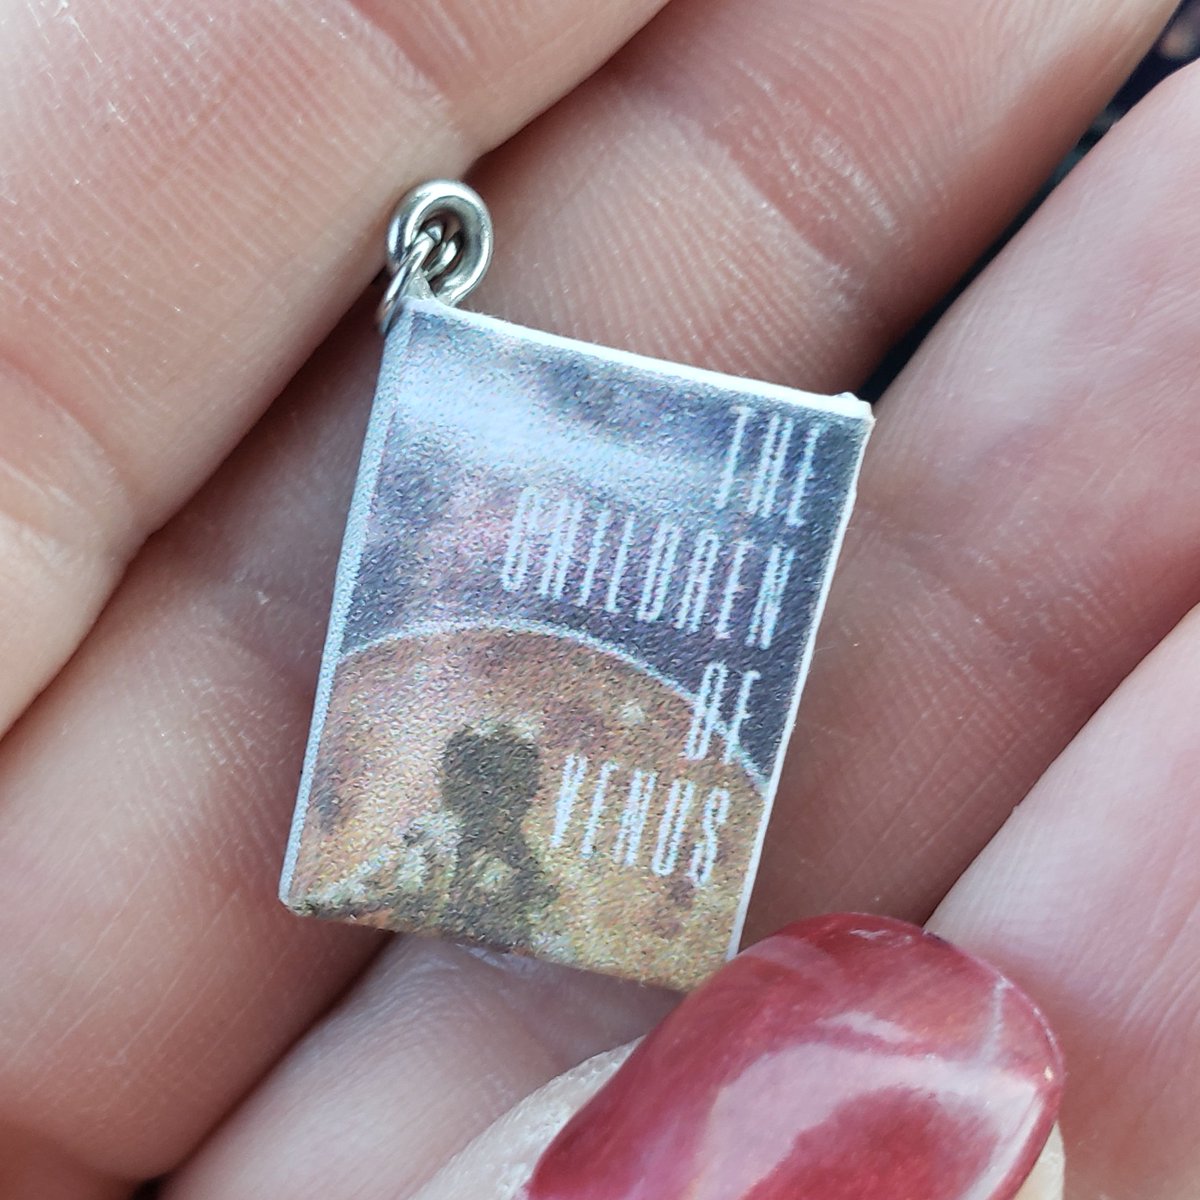 A gift from my husband--book earrings depicting my debut novel. He's so sweet! I'll be wearing these to all future events.
#thechildrenofvenus #theconquerorsoftriton #booksigning #debutnovel #amwritingscifi #writingcommunity